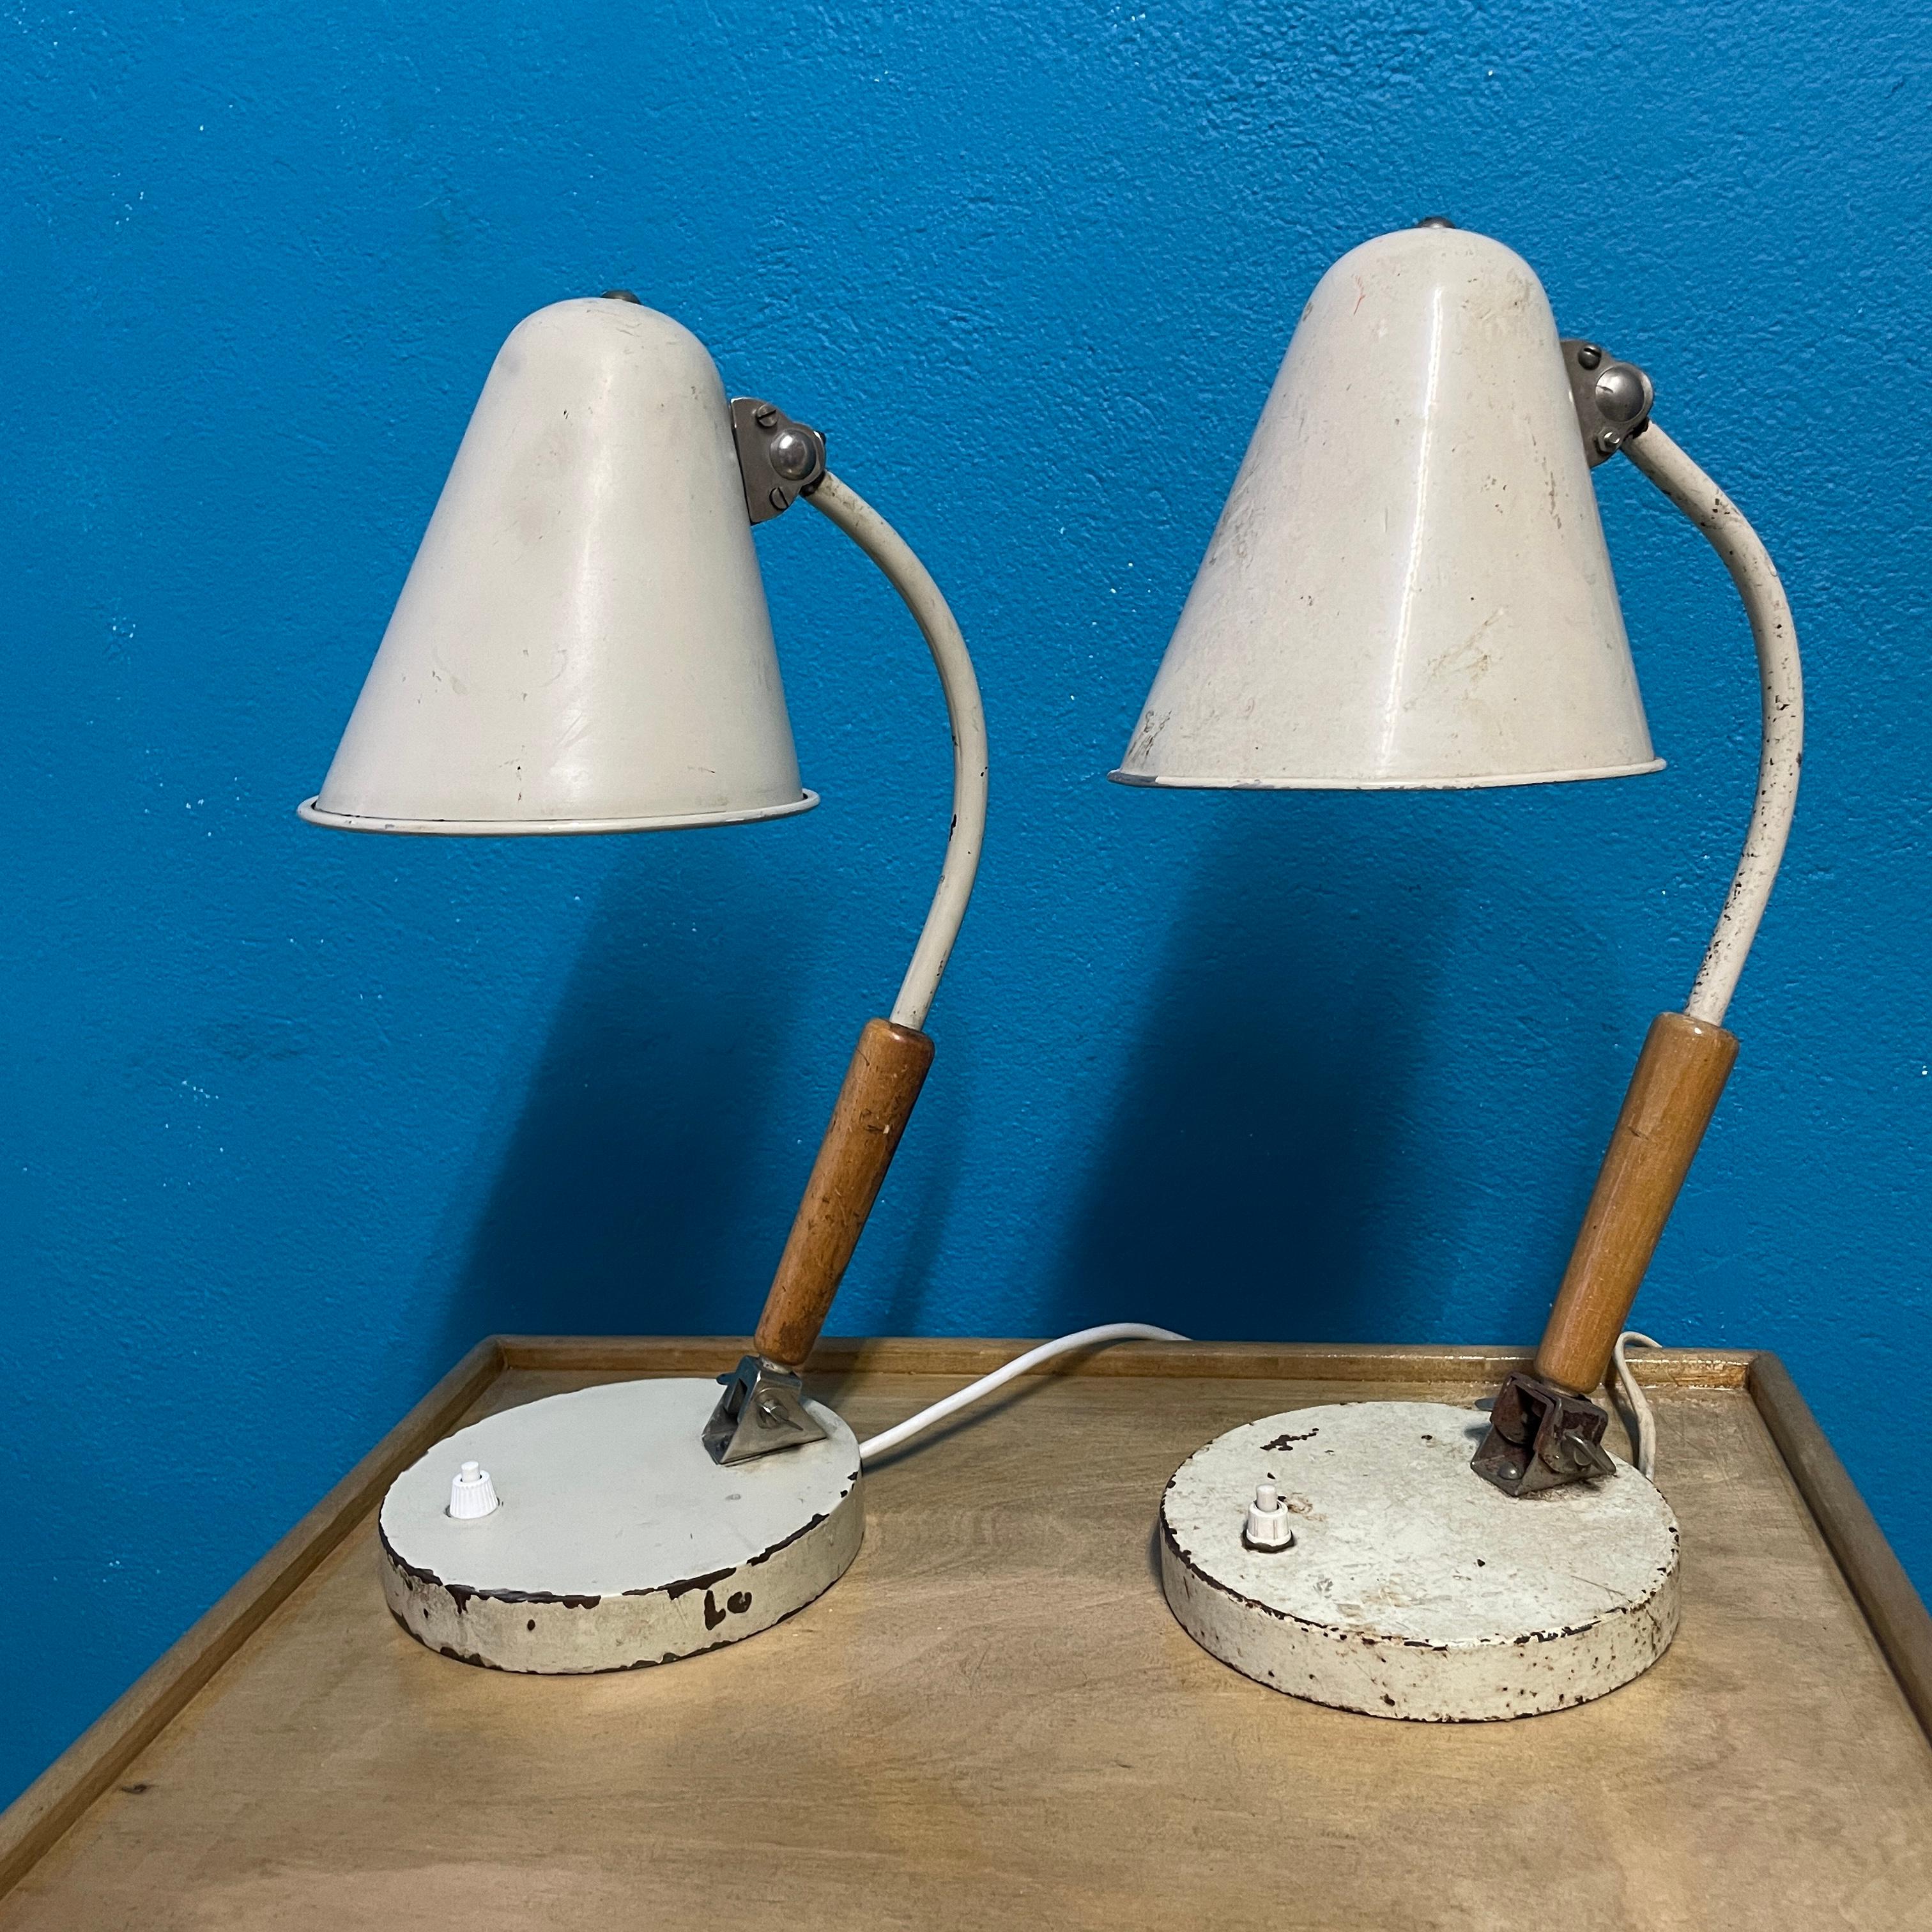 A pair of Desk Lamps, model 81408, designed by Paavo Tynell for Idman. 
Beige colored metal arm with teak-wood detail. Adjustable arm and shade. 
Manufacturer's marking 